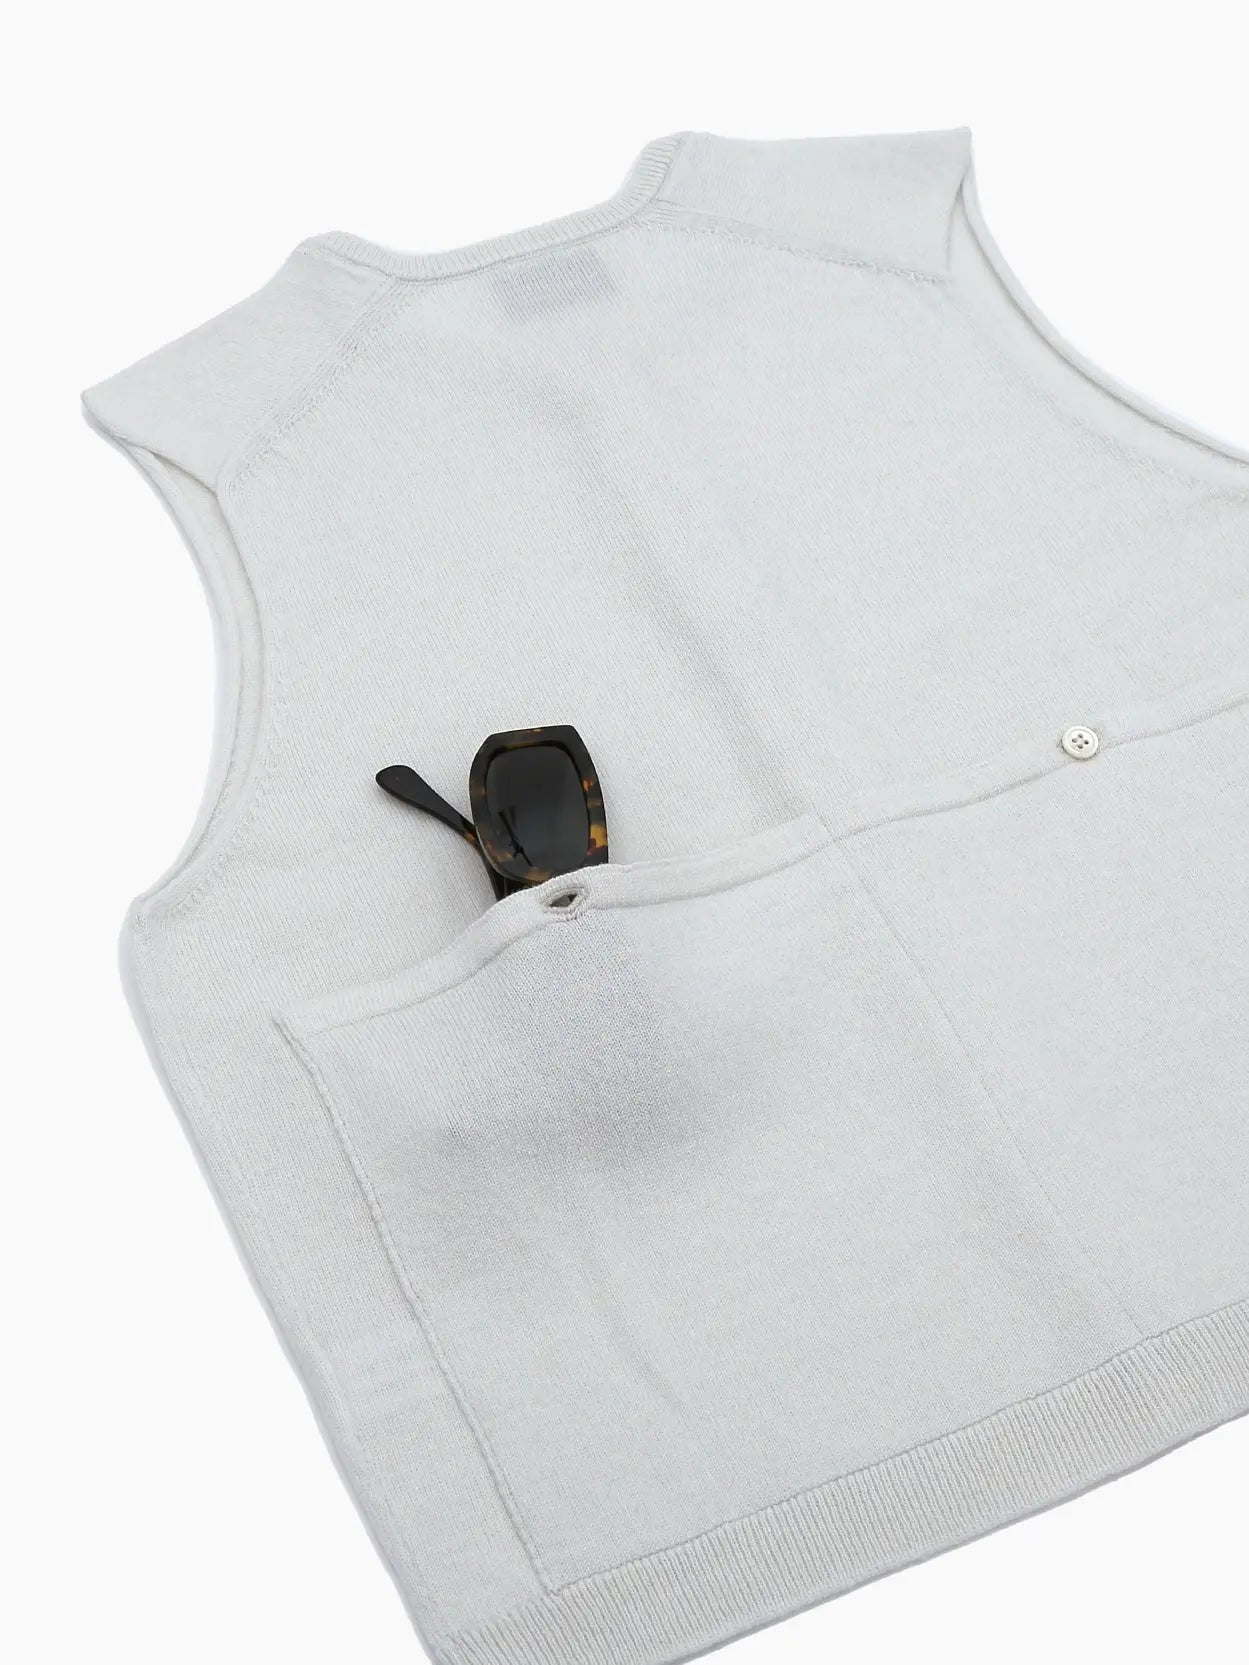 A light gray, sleeveless, button-up knit vest is shown against a white background. The vest has a round neckline and features a series of buttons down the front. The label inside the collar reads "Bielo," exclusively available at Bassalstore in Barcelona.